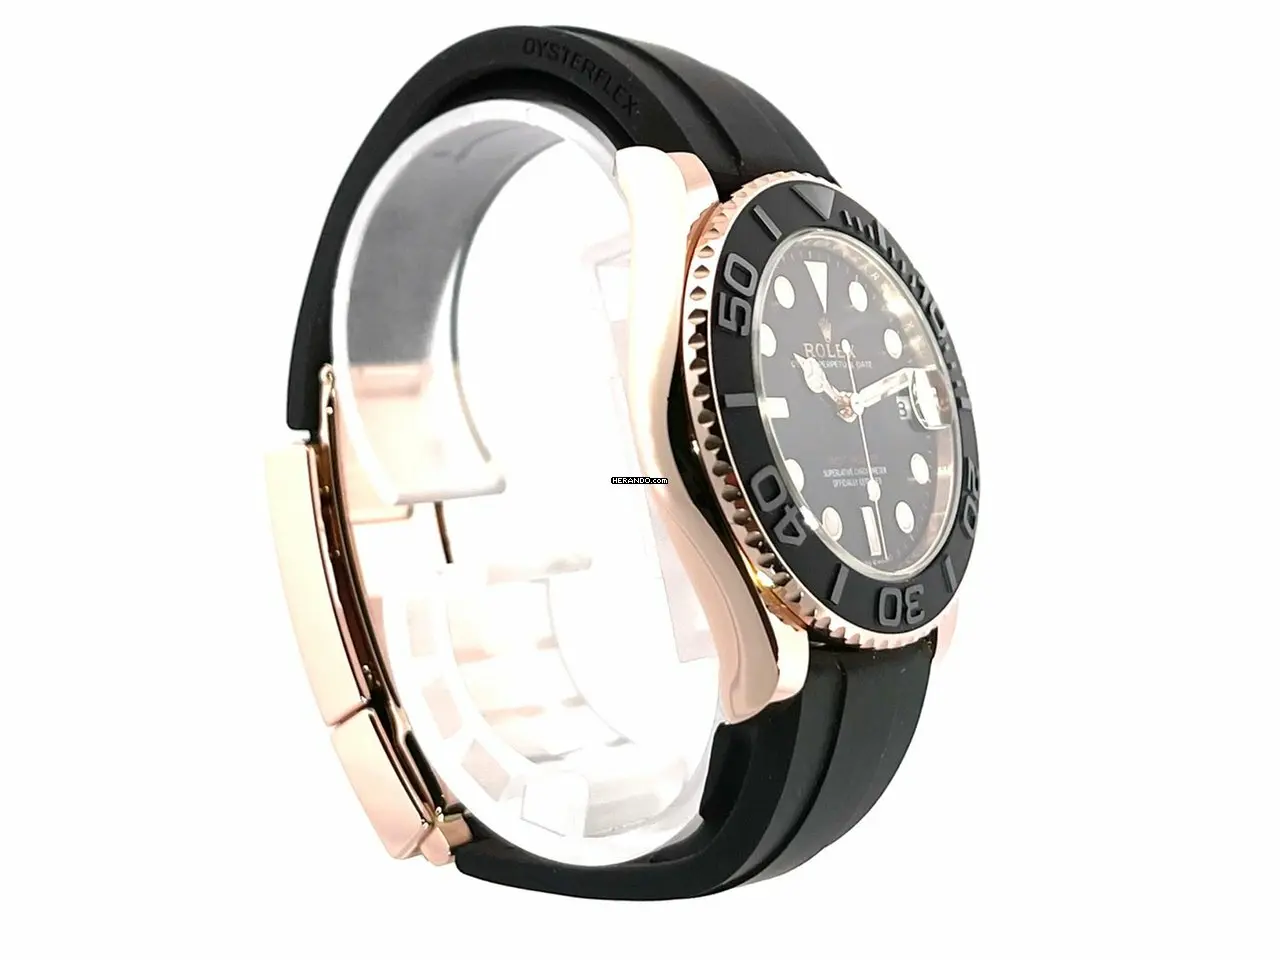 watches-37525-4139988-n7whovq64qg2f60hscz6zt26-ExtraLarge.webp